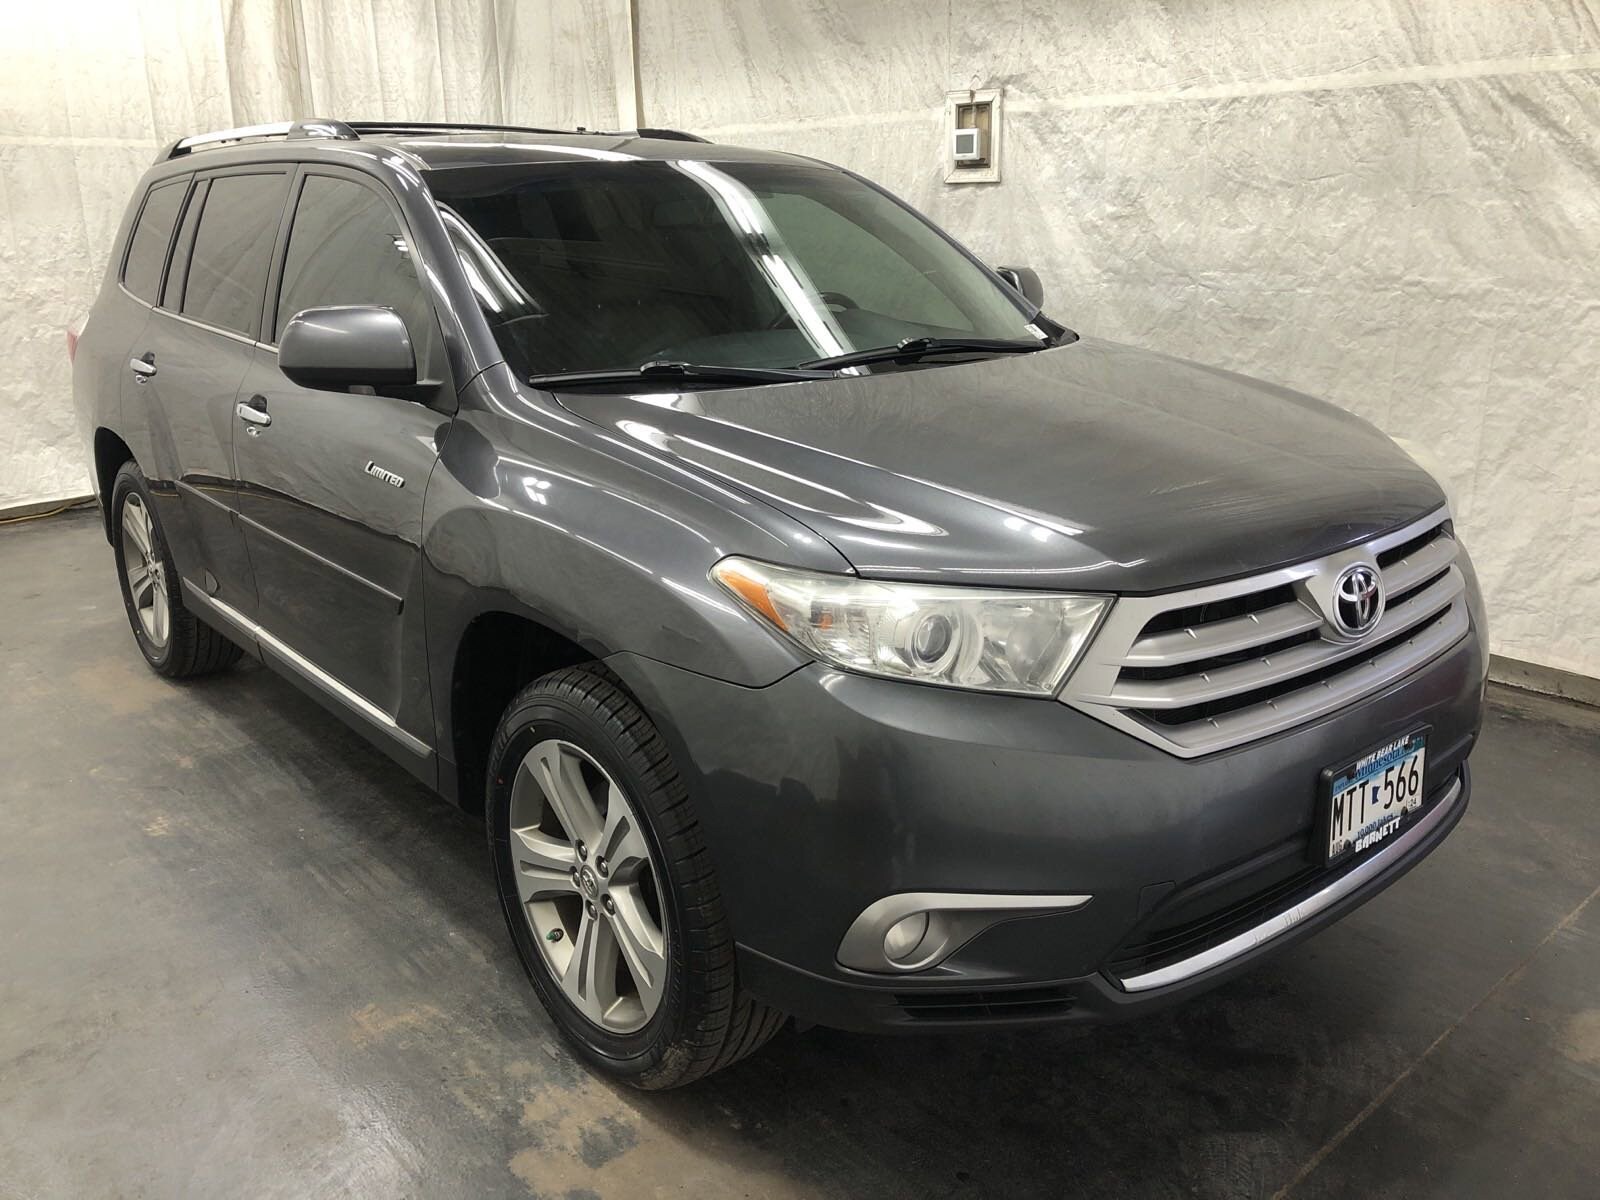 Used 2011 Toyota Highlander Limited with VIN 5TDDK3EH9BS078286 for sale in White Bear Lake, Minnesota